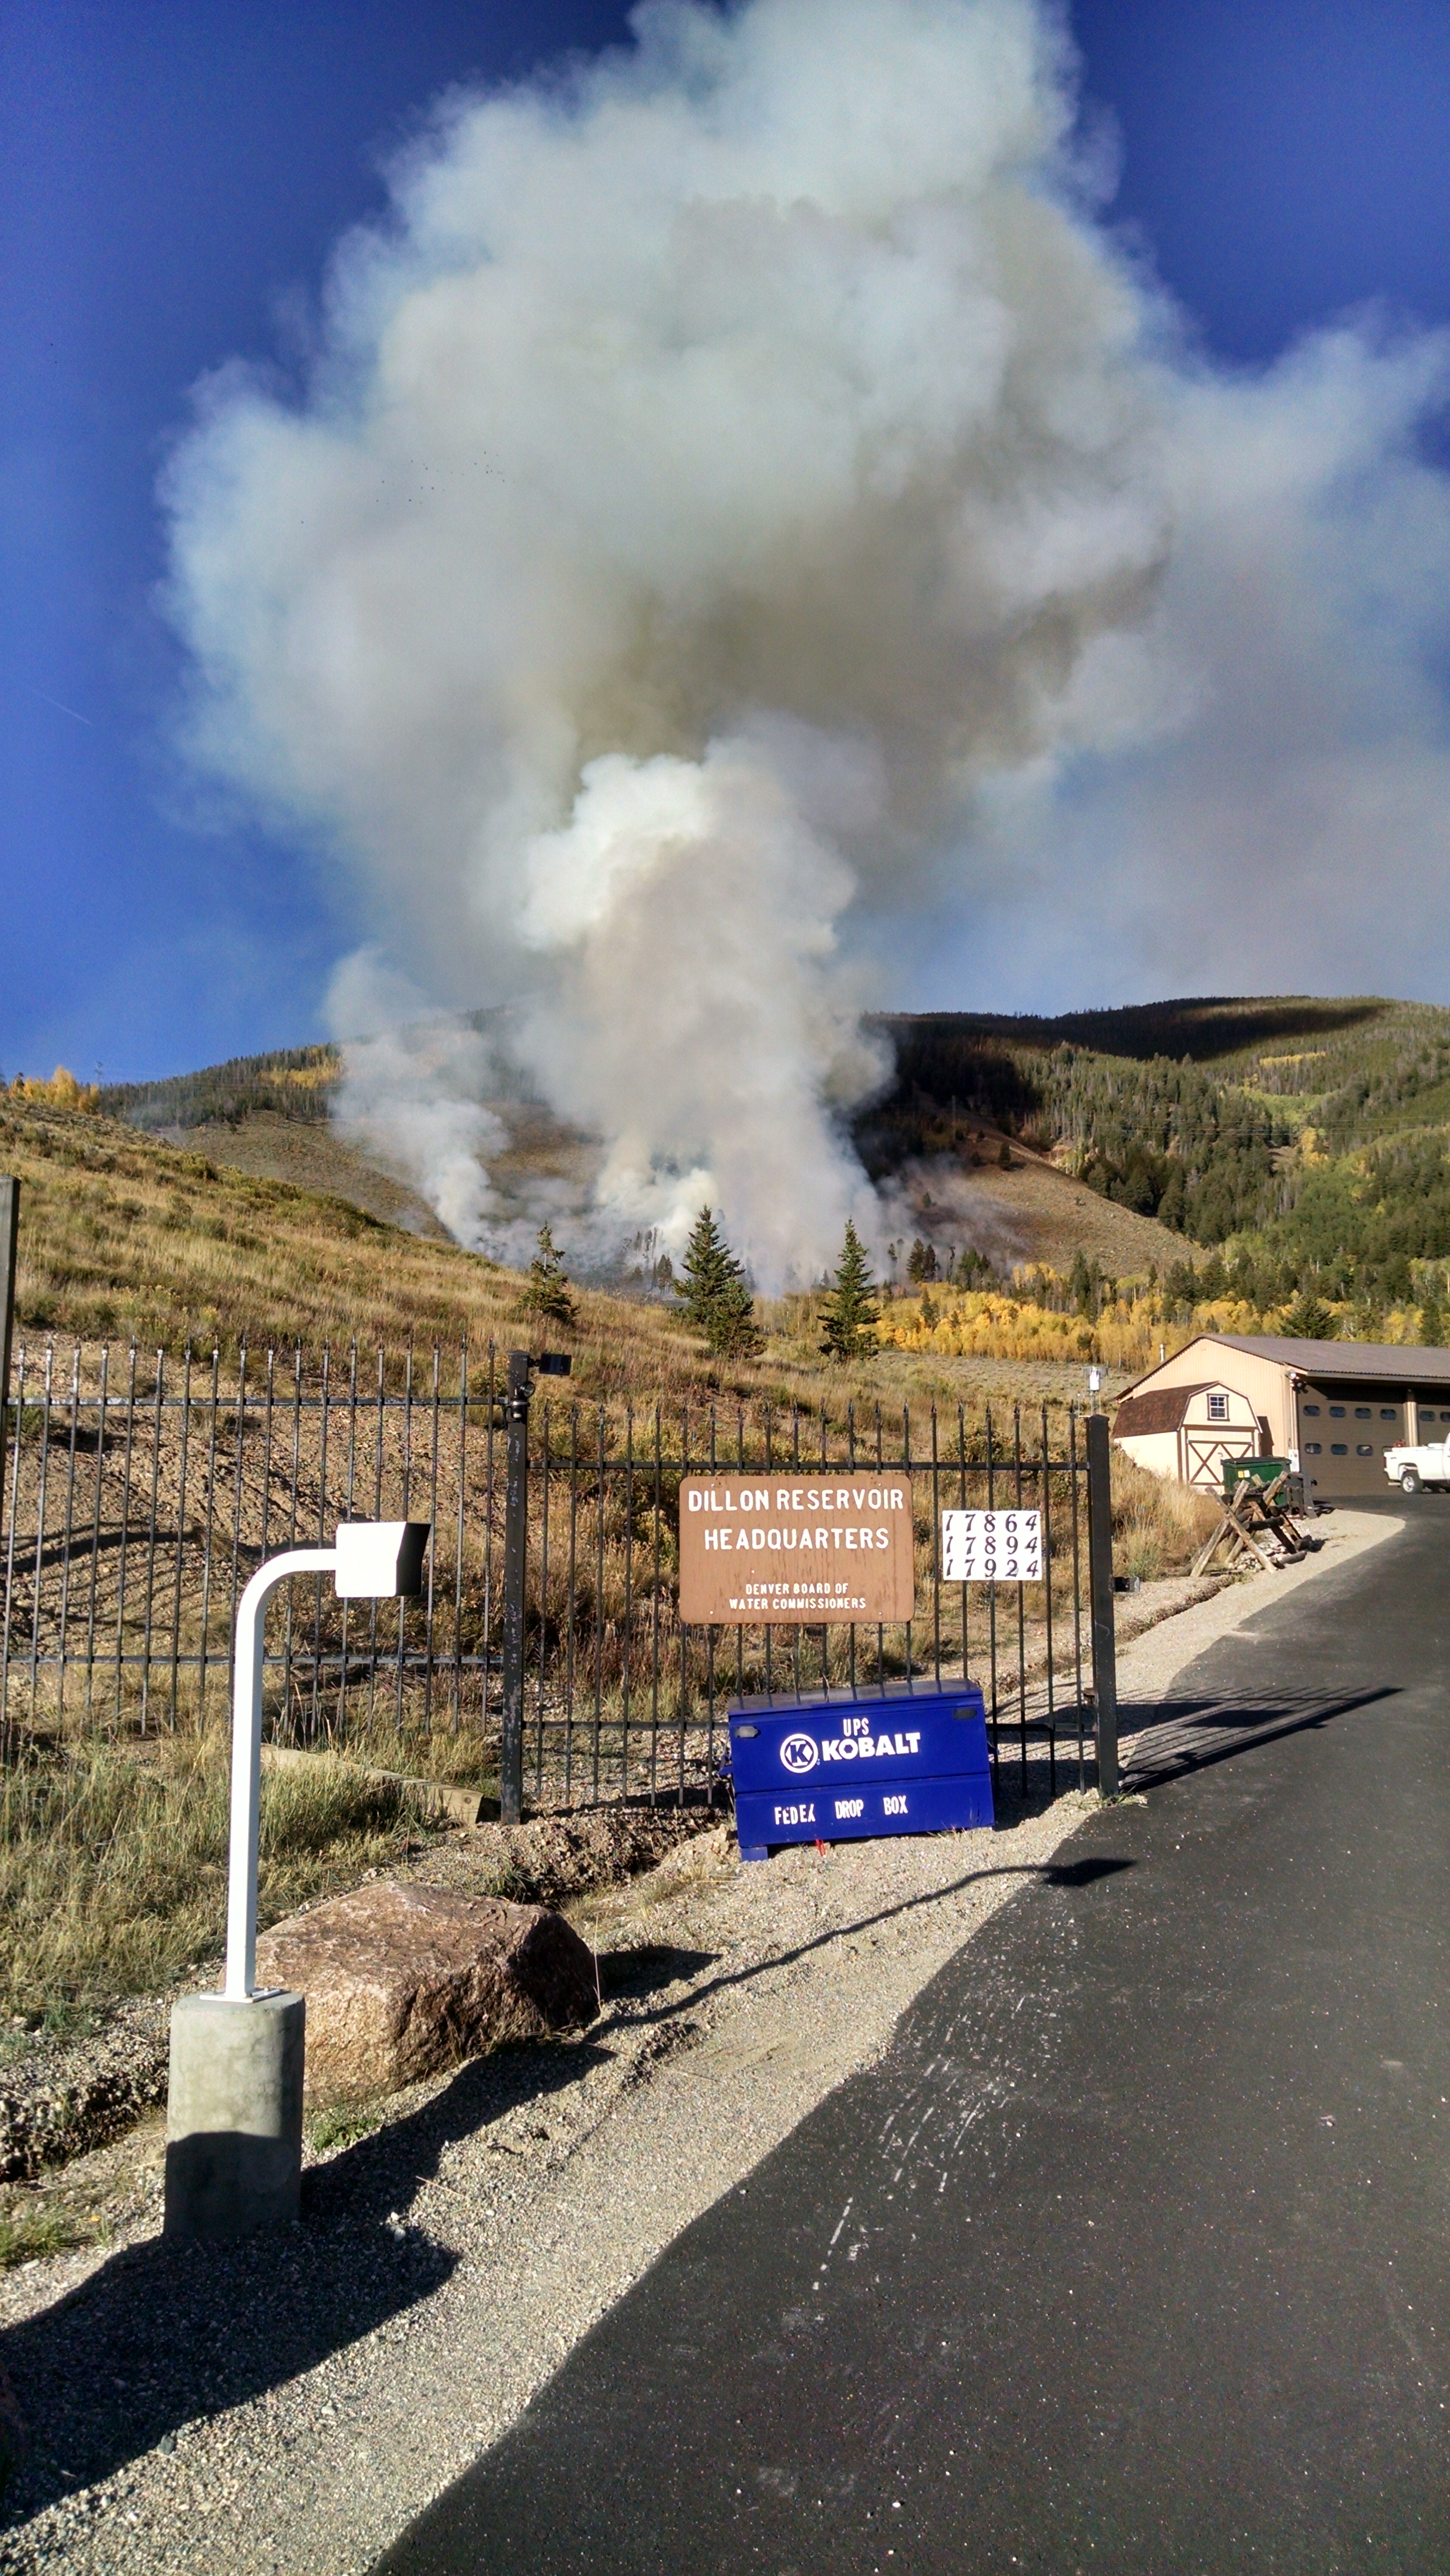 The Tenderfoot 2 wildfire erupted Sept. 18, northeast of Dillon Reservoir in Summit County.